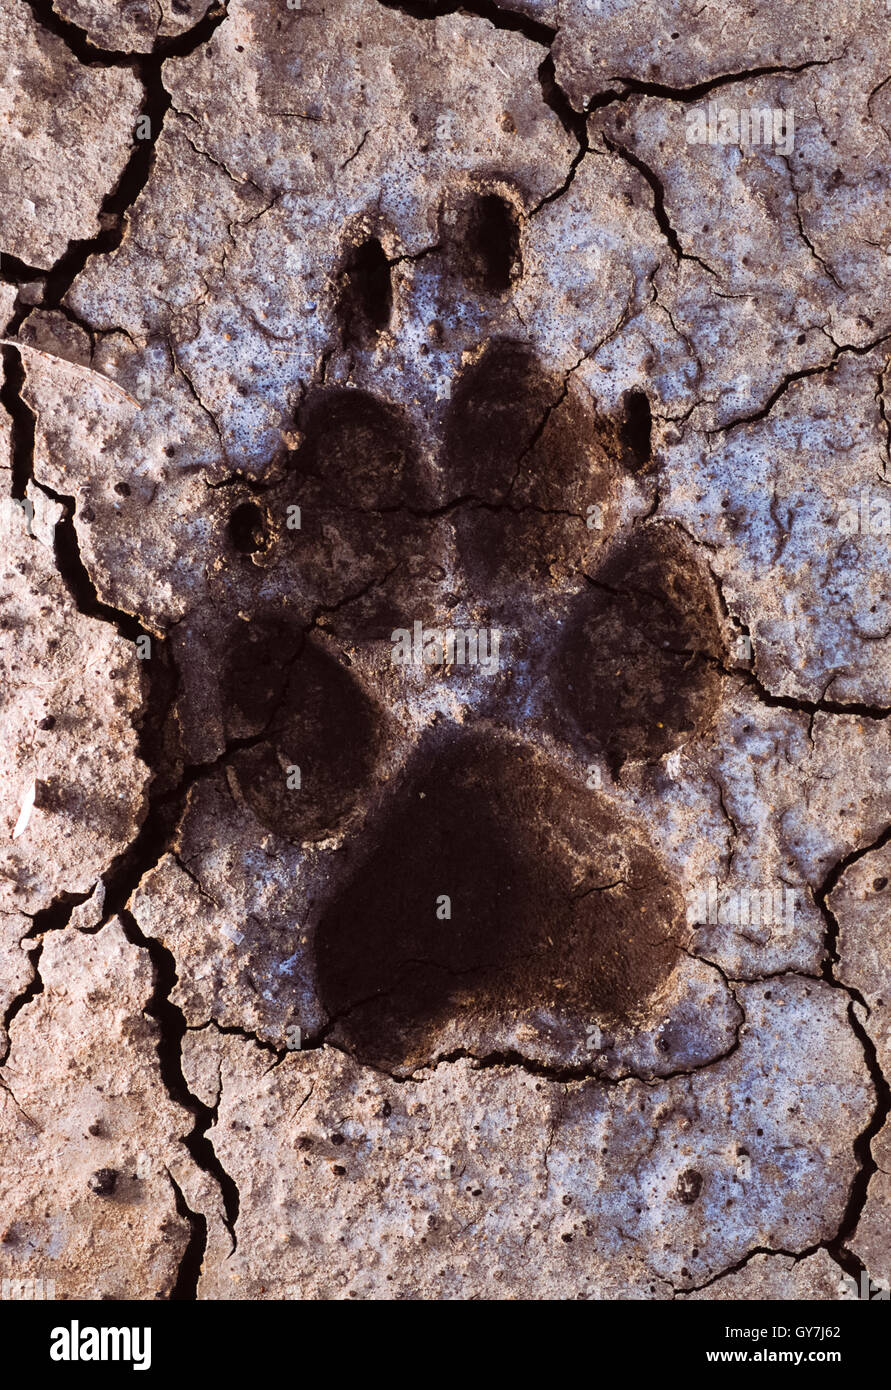 Indian Wolf, (Canis lupus pallipes or canis indica),paw prints in dry mud, Blackbuck National Park, Gujerat,India Stock Photo